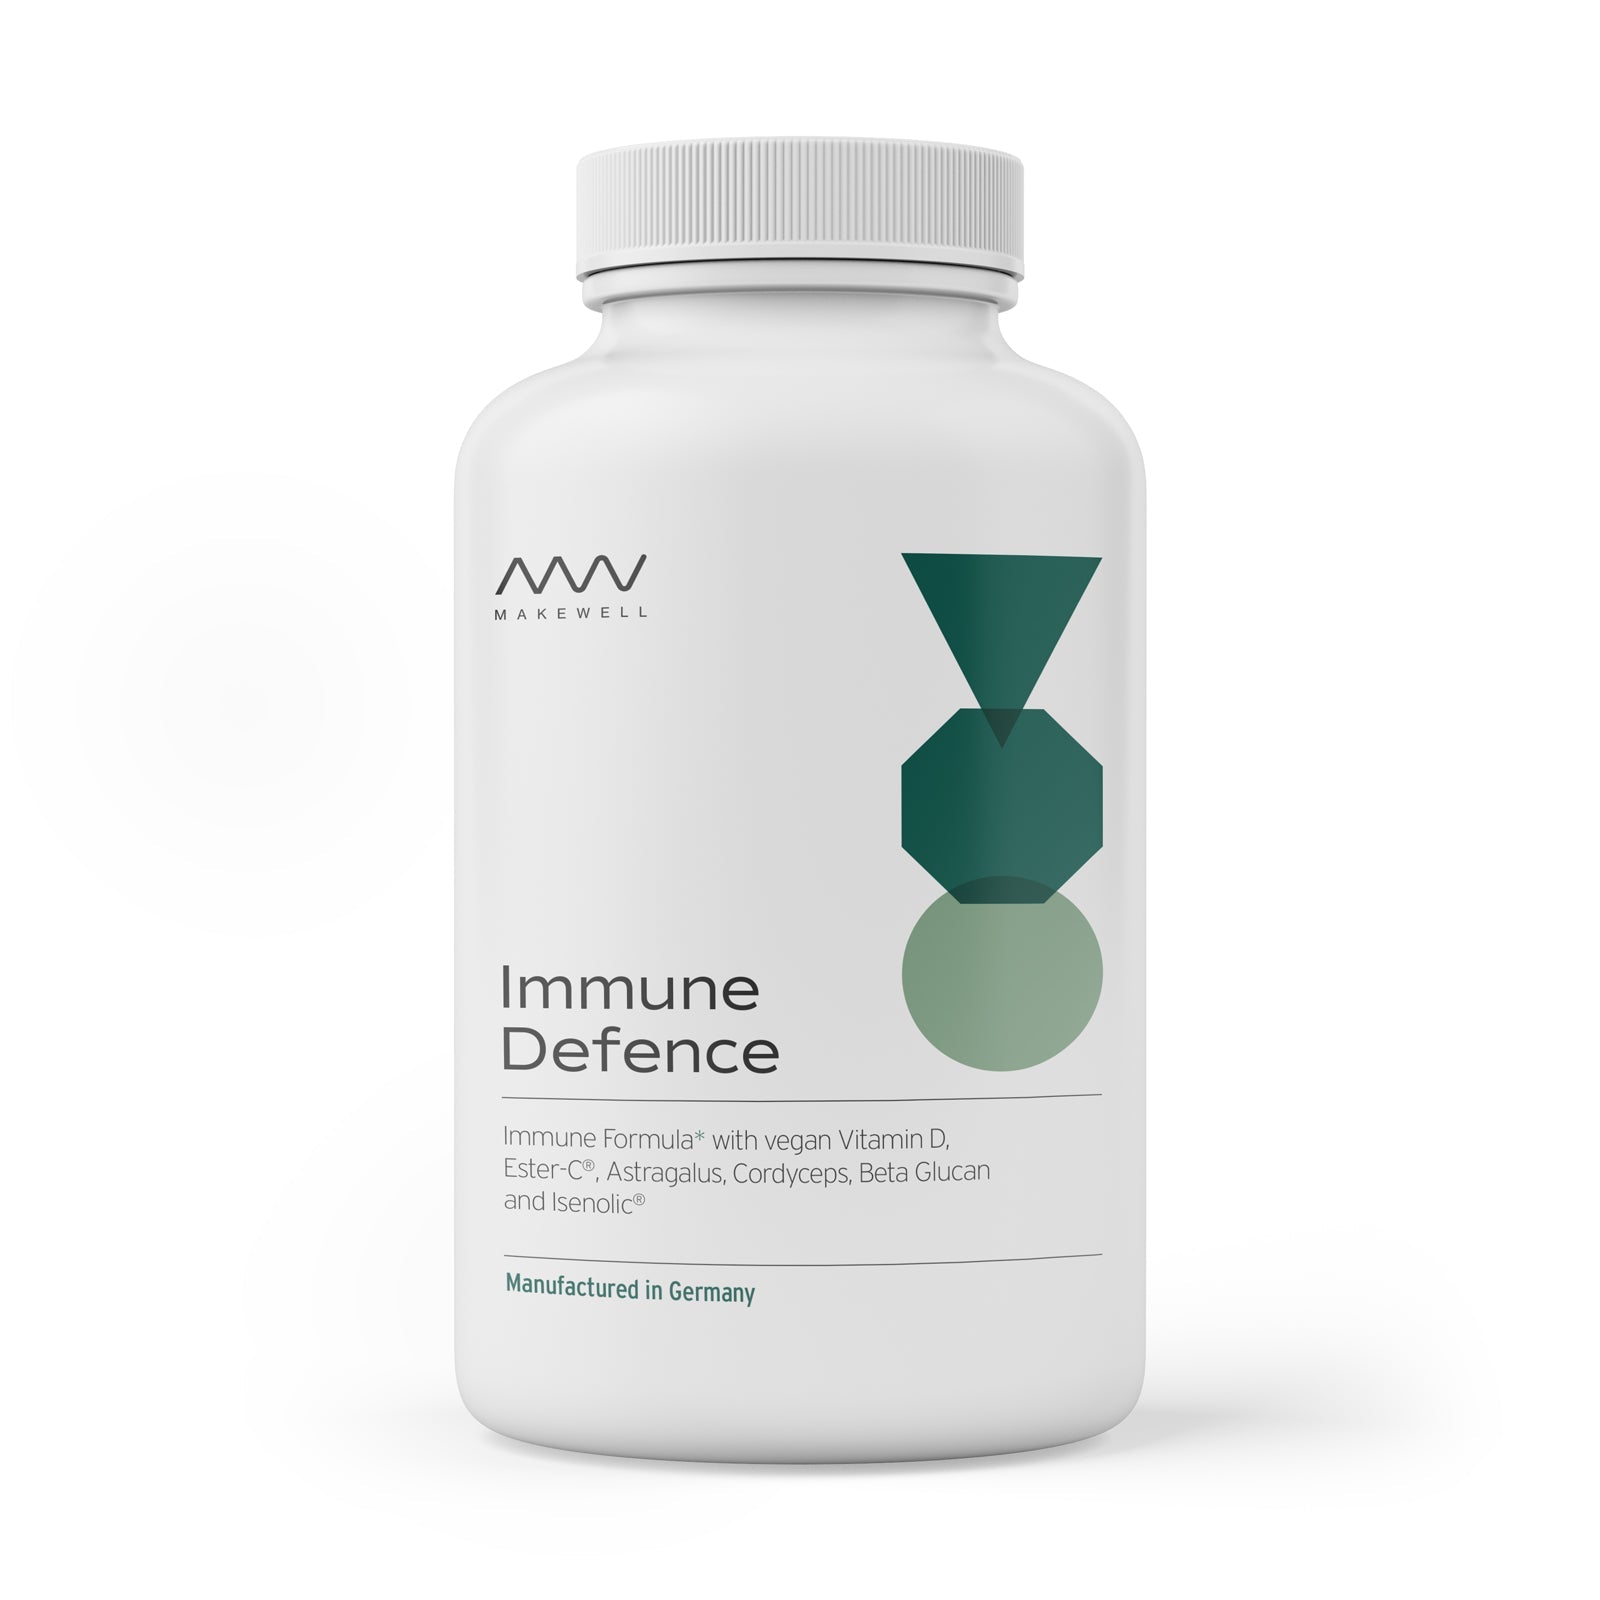 Immune Defence - 120 Capsules | Immunity Support | MakeWell